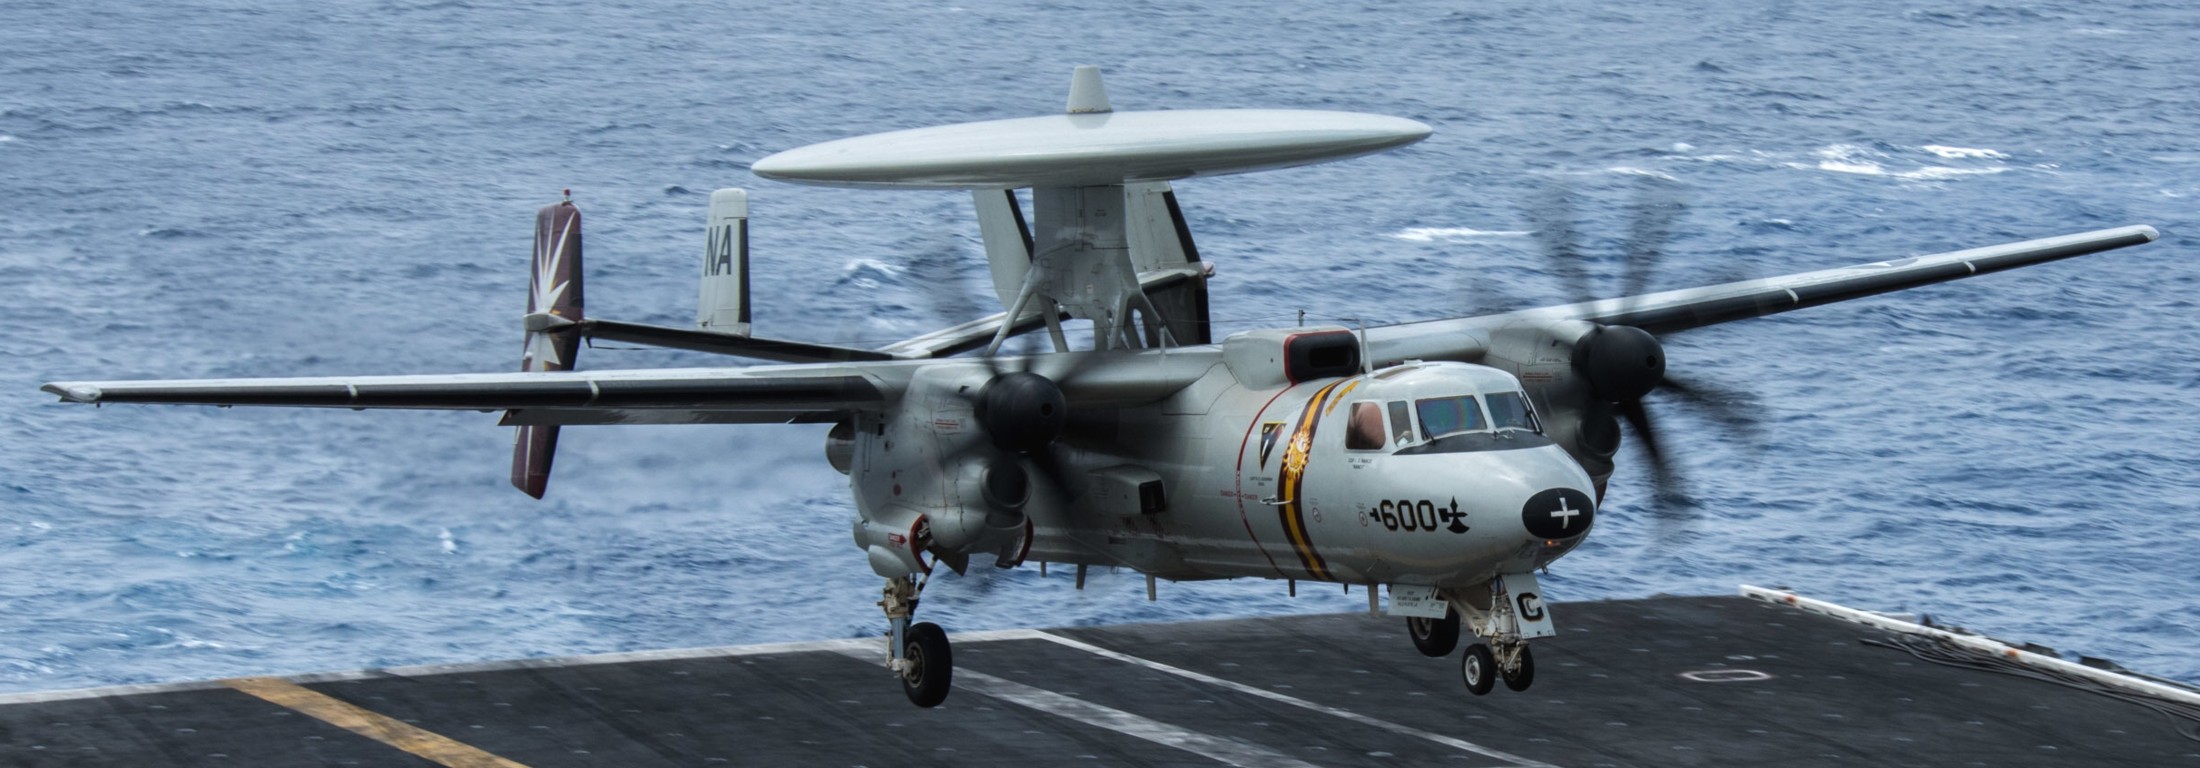 vaw-116 sun kings airborne command control squadron carrier early warning cvw-17 uss theodore roosevelt cvn-71 61